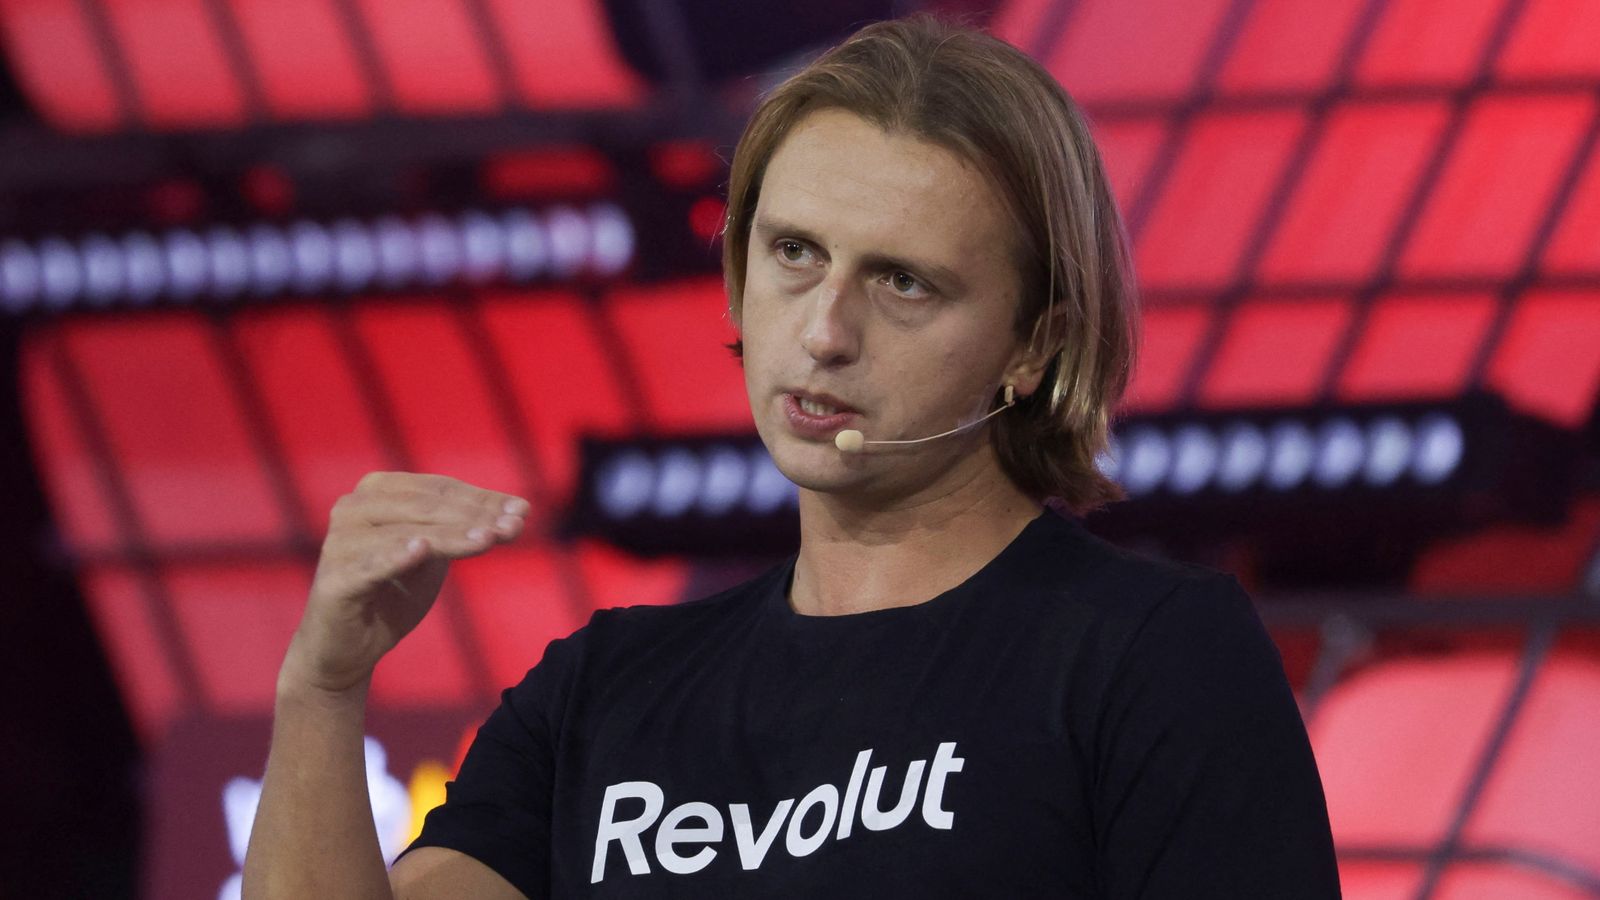 Revolut founder Storonsky to cash in as part of 0m share sale